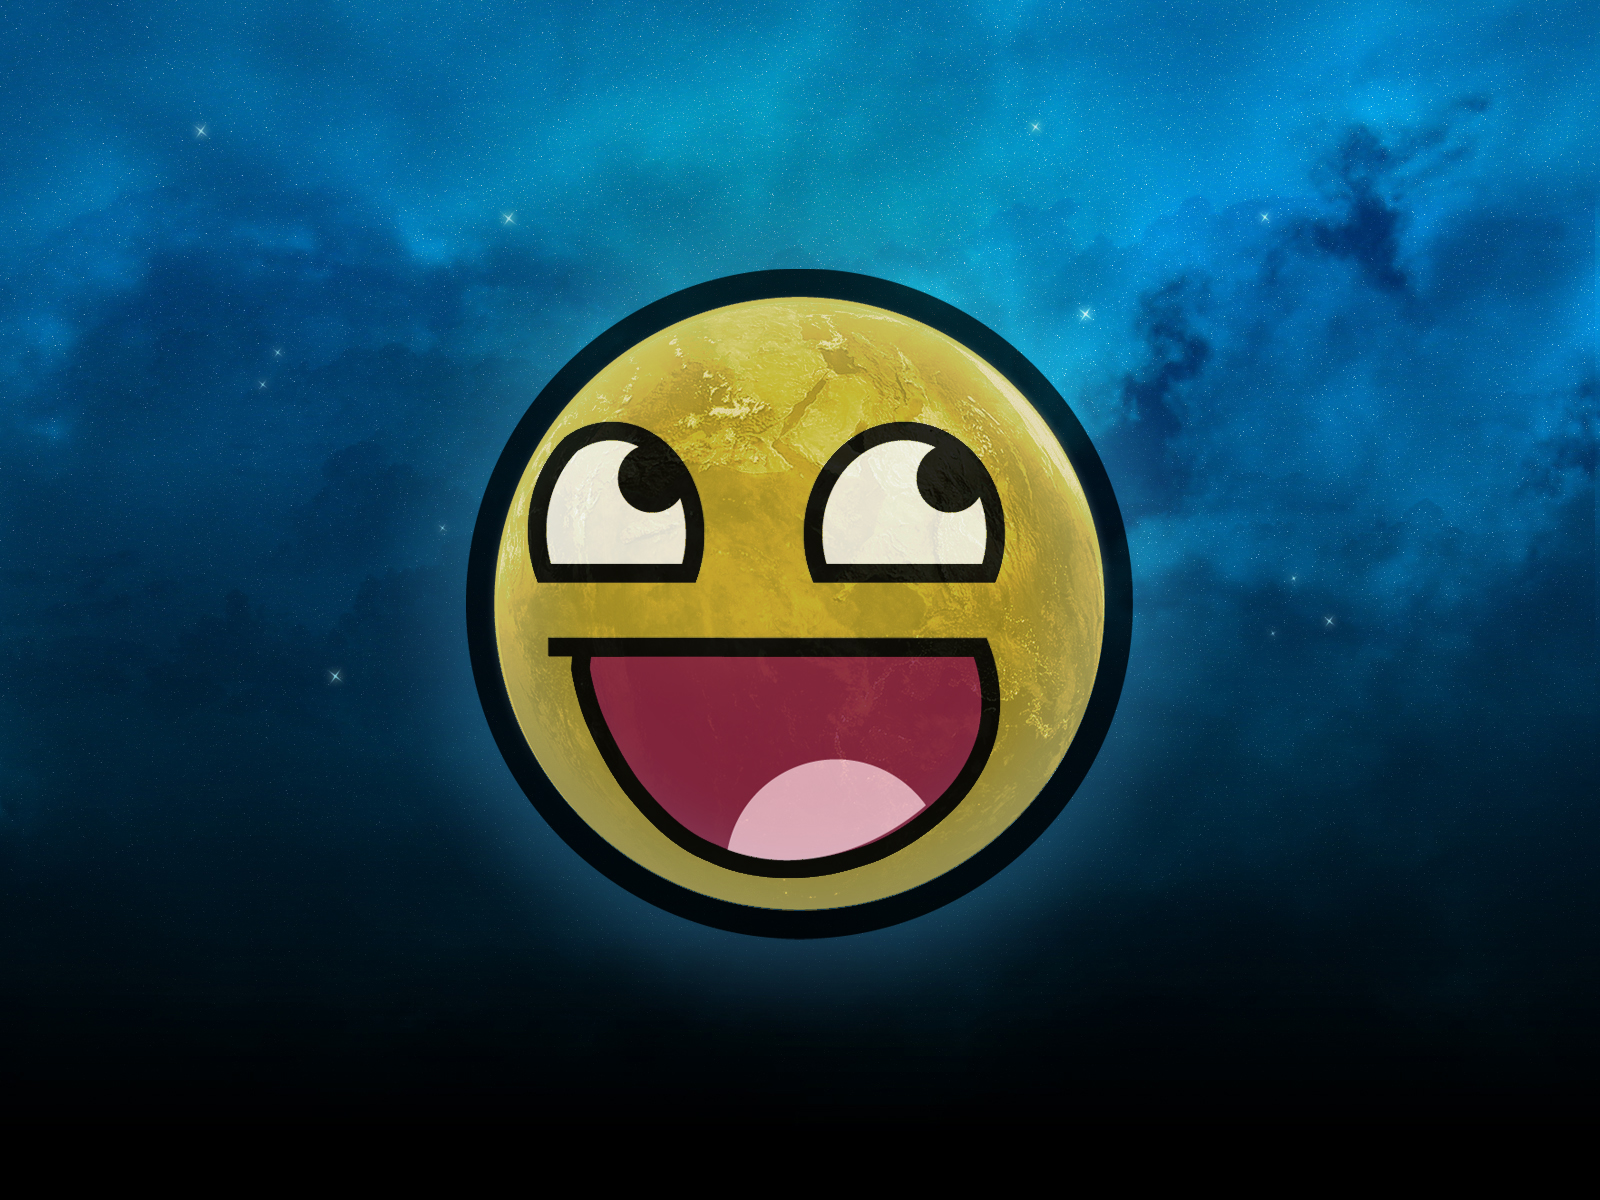 Awesome Smiley Face Backgrounds Images Pictures   Becuo 1600x1200